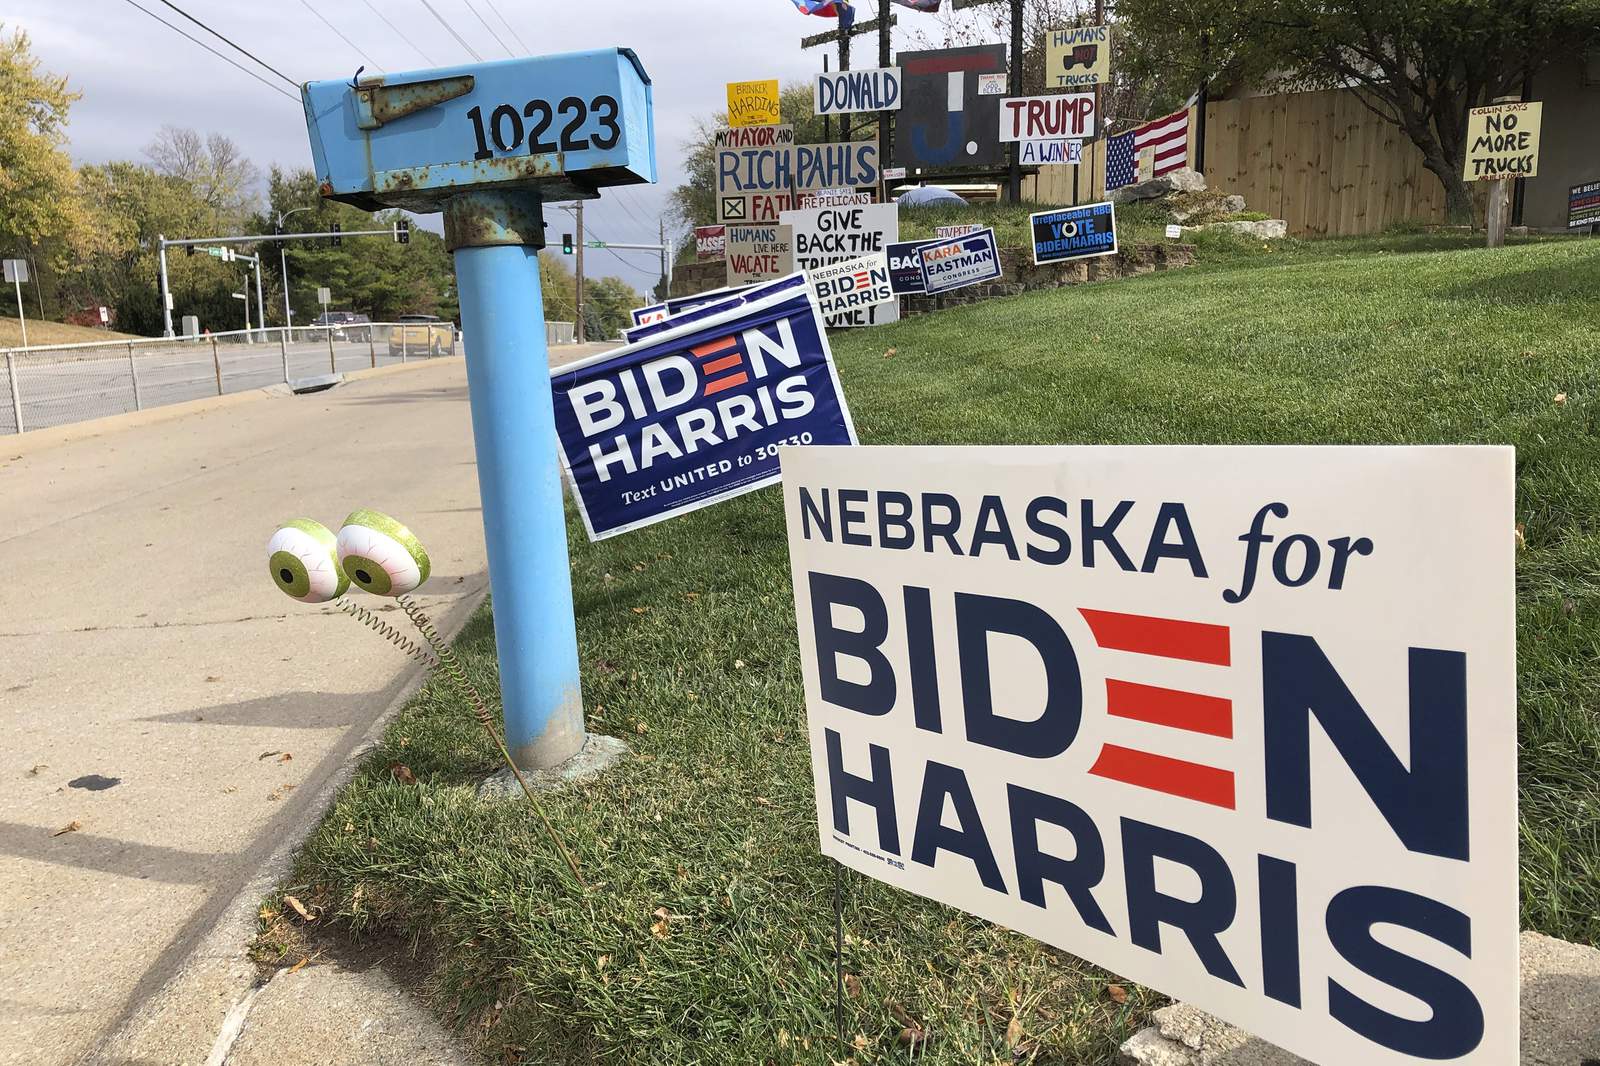 Nebraska, Maine could play pivotal role in presidential race